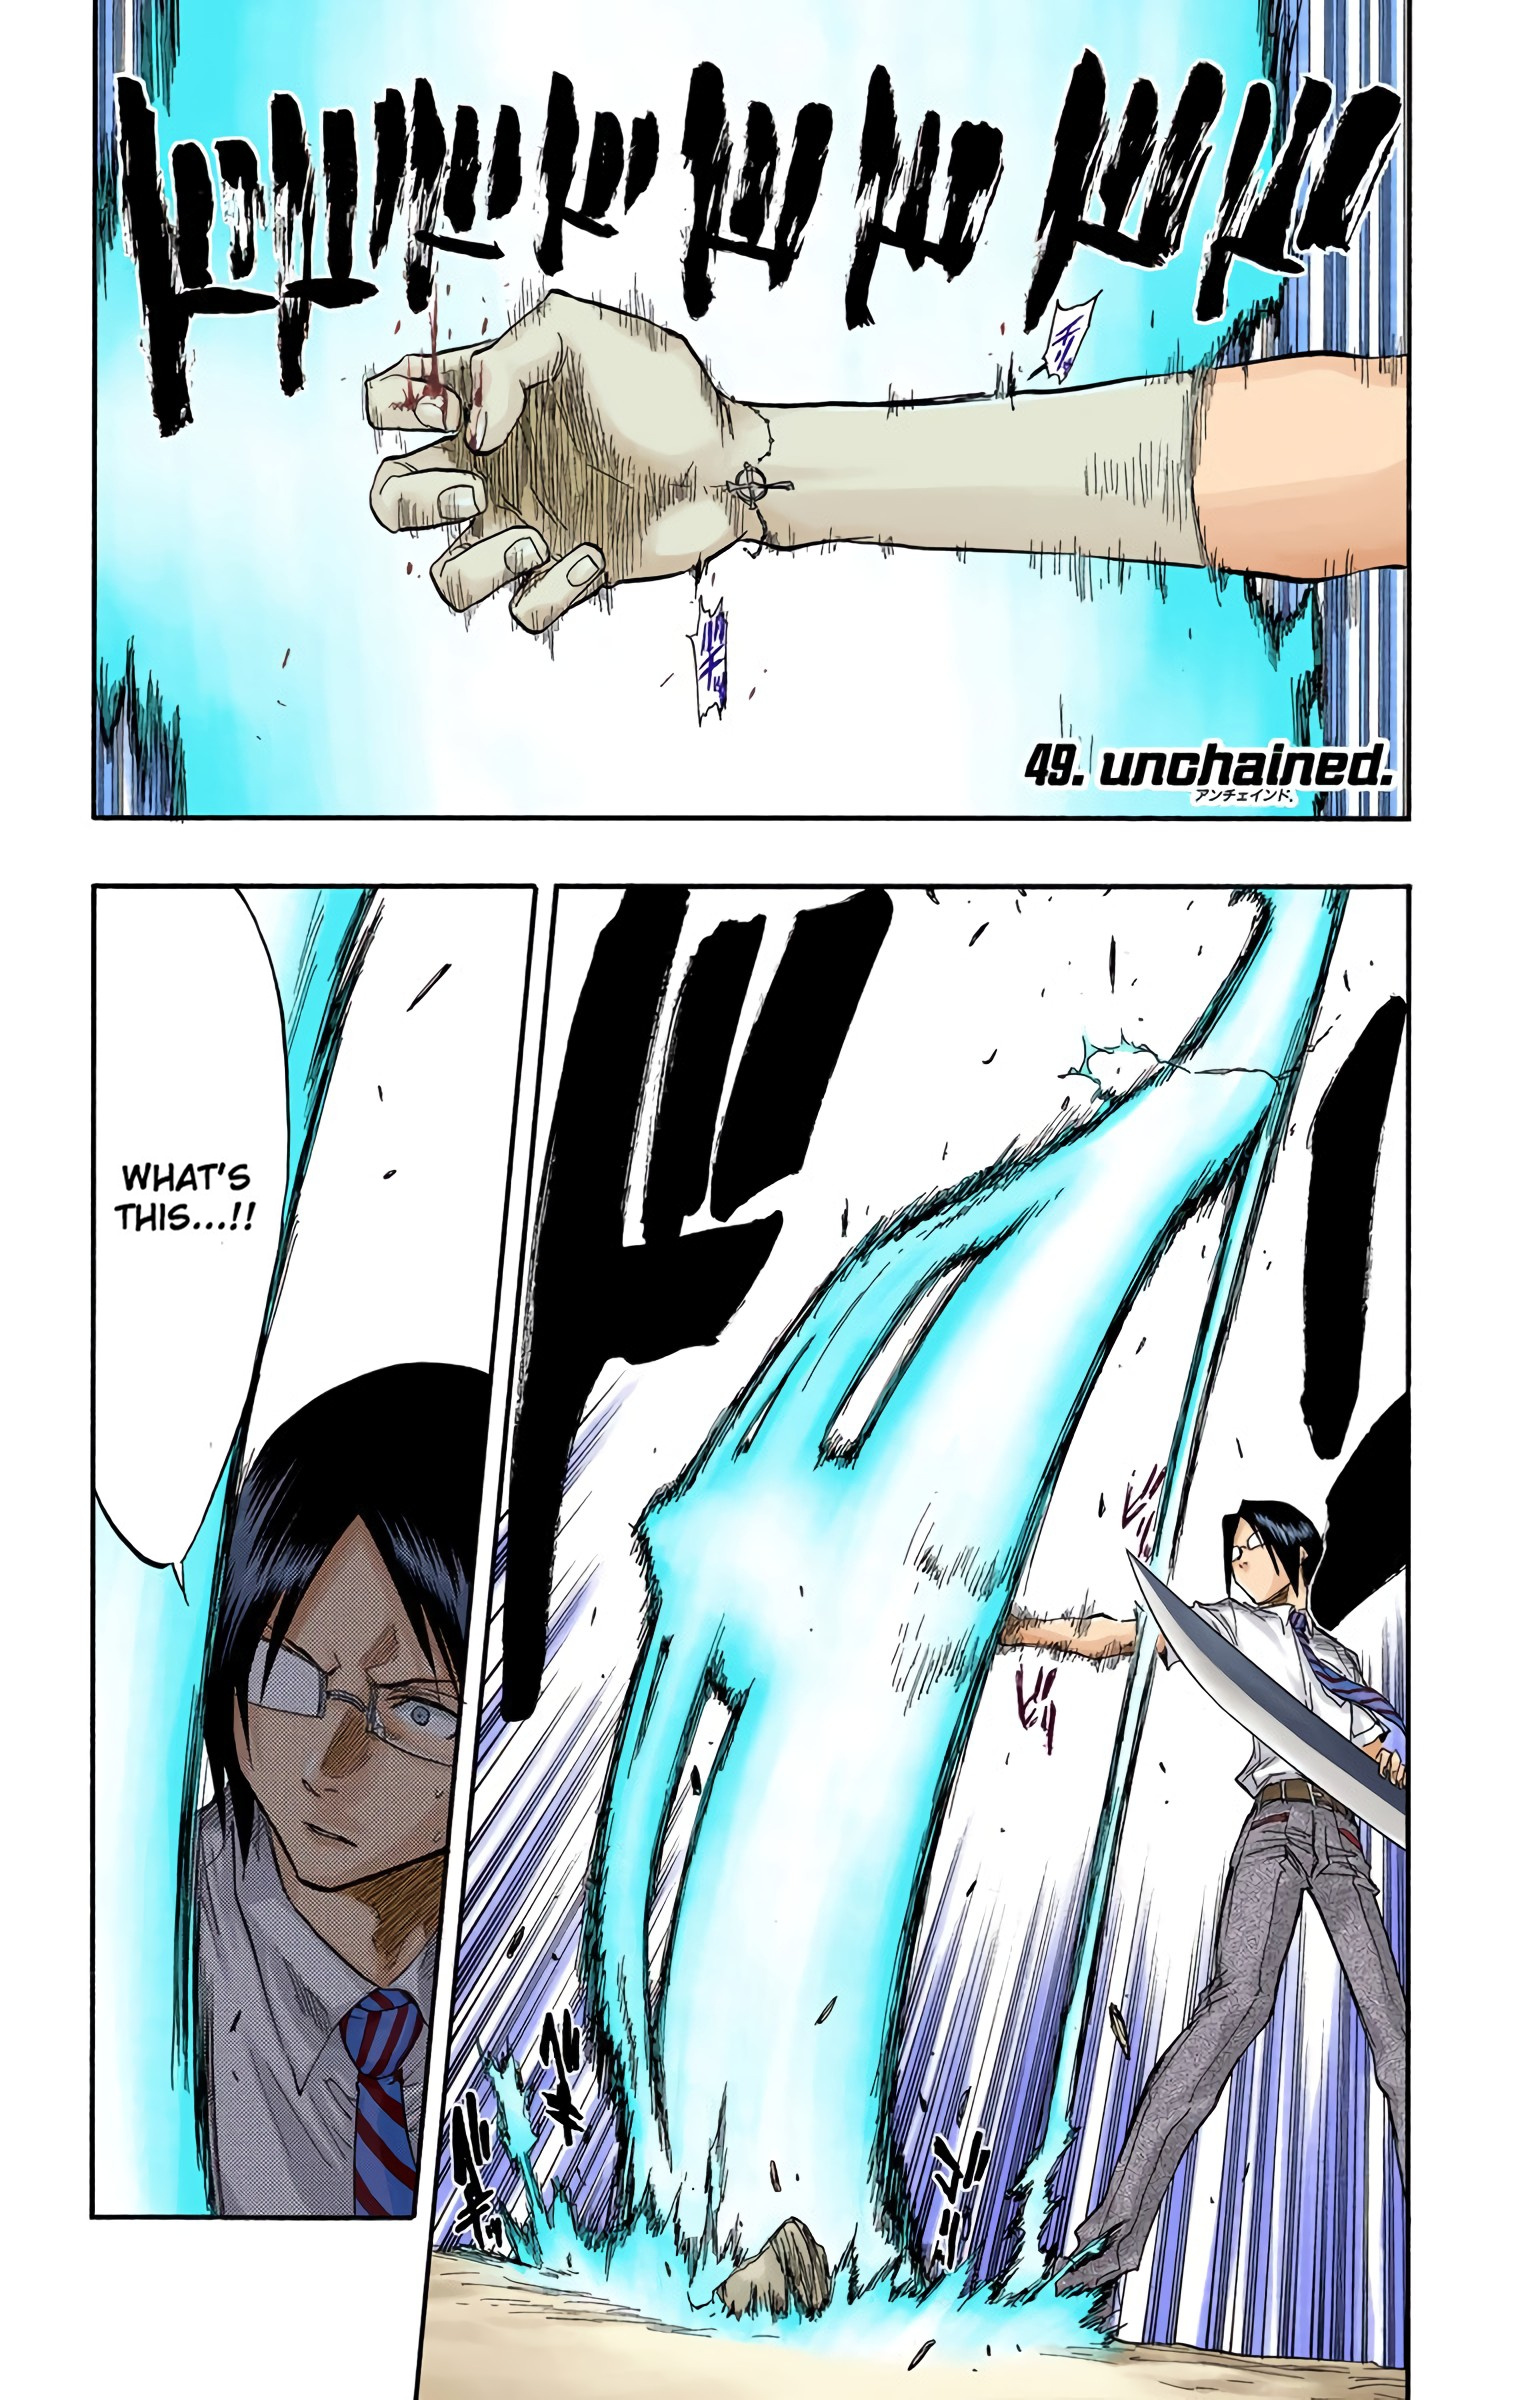 Bleach - Digital Colored Comics Vol.6 Chapter 49: Unchained. - Picture 1